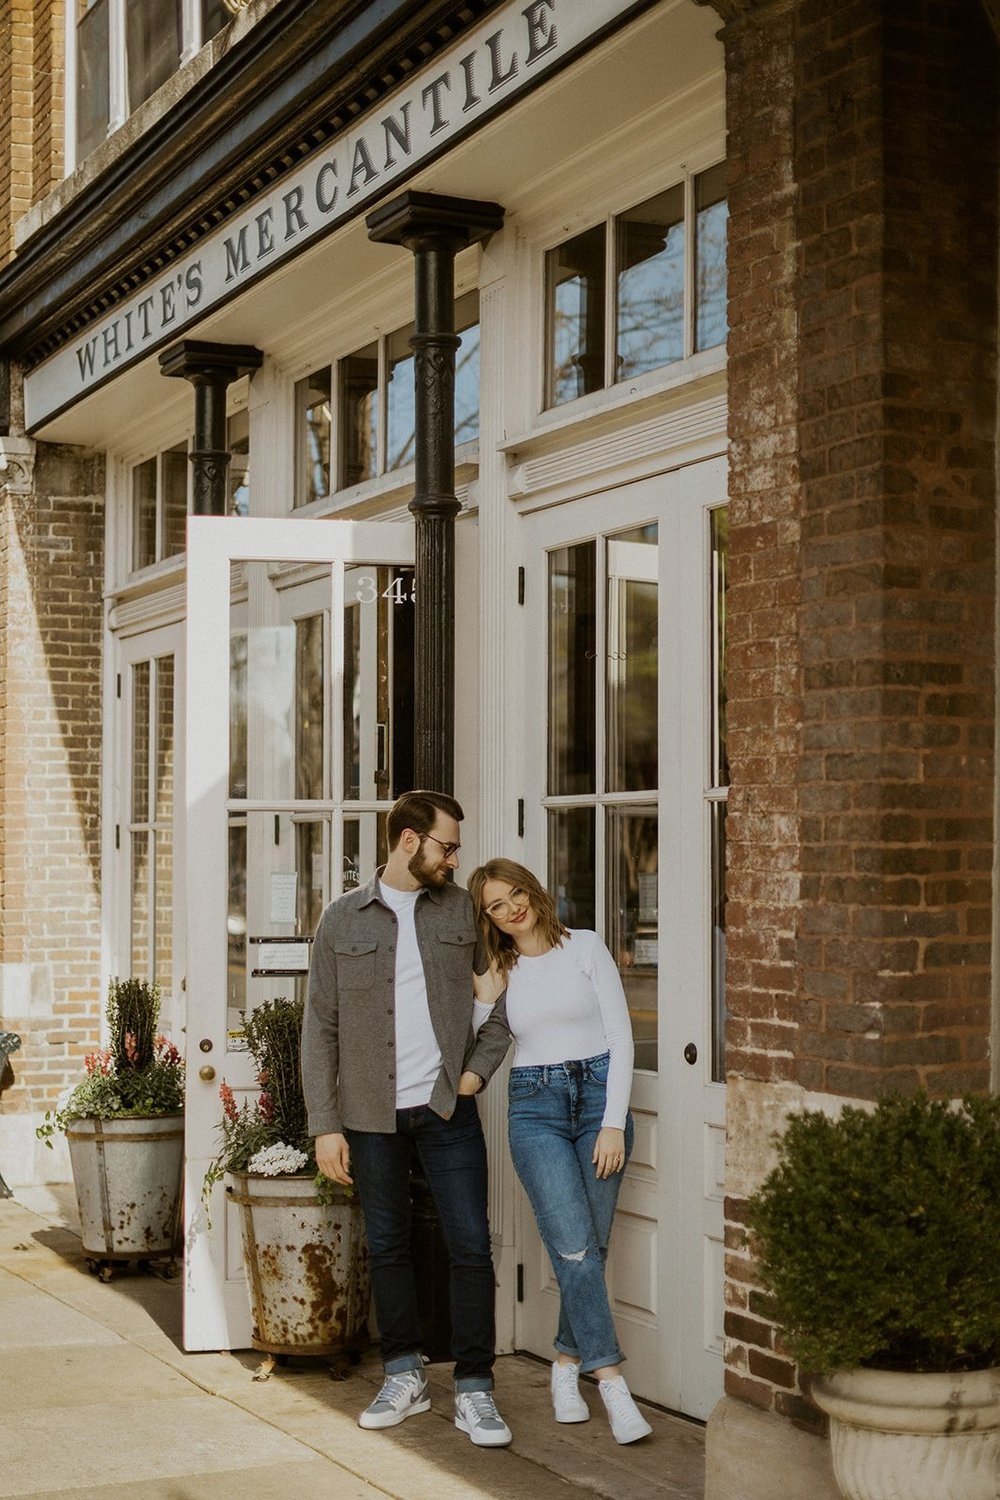 Couple standing in front of White's Mercantile